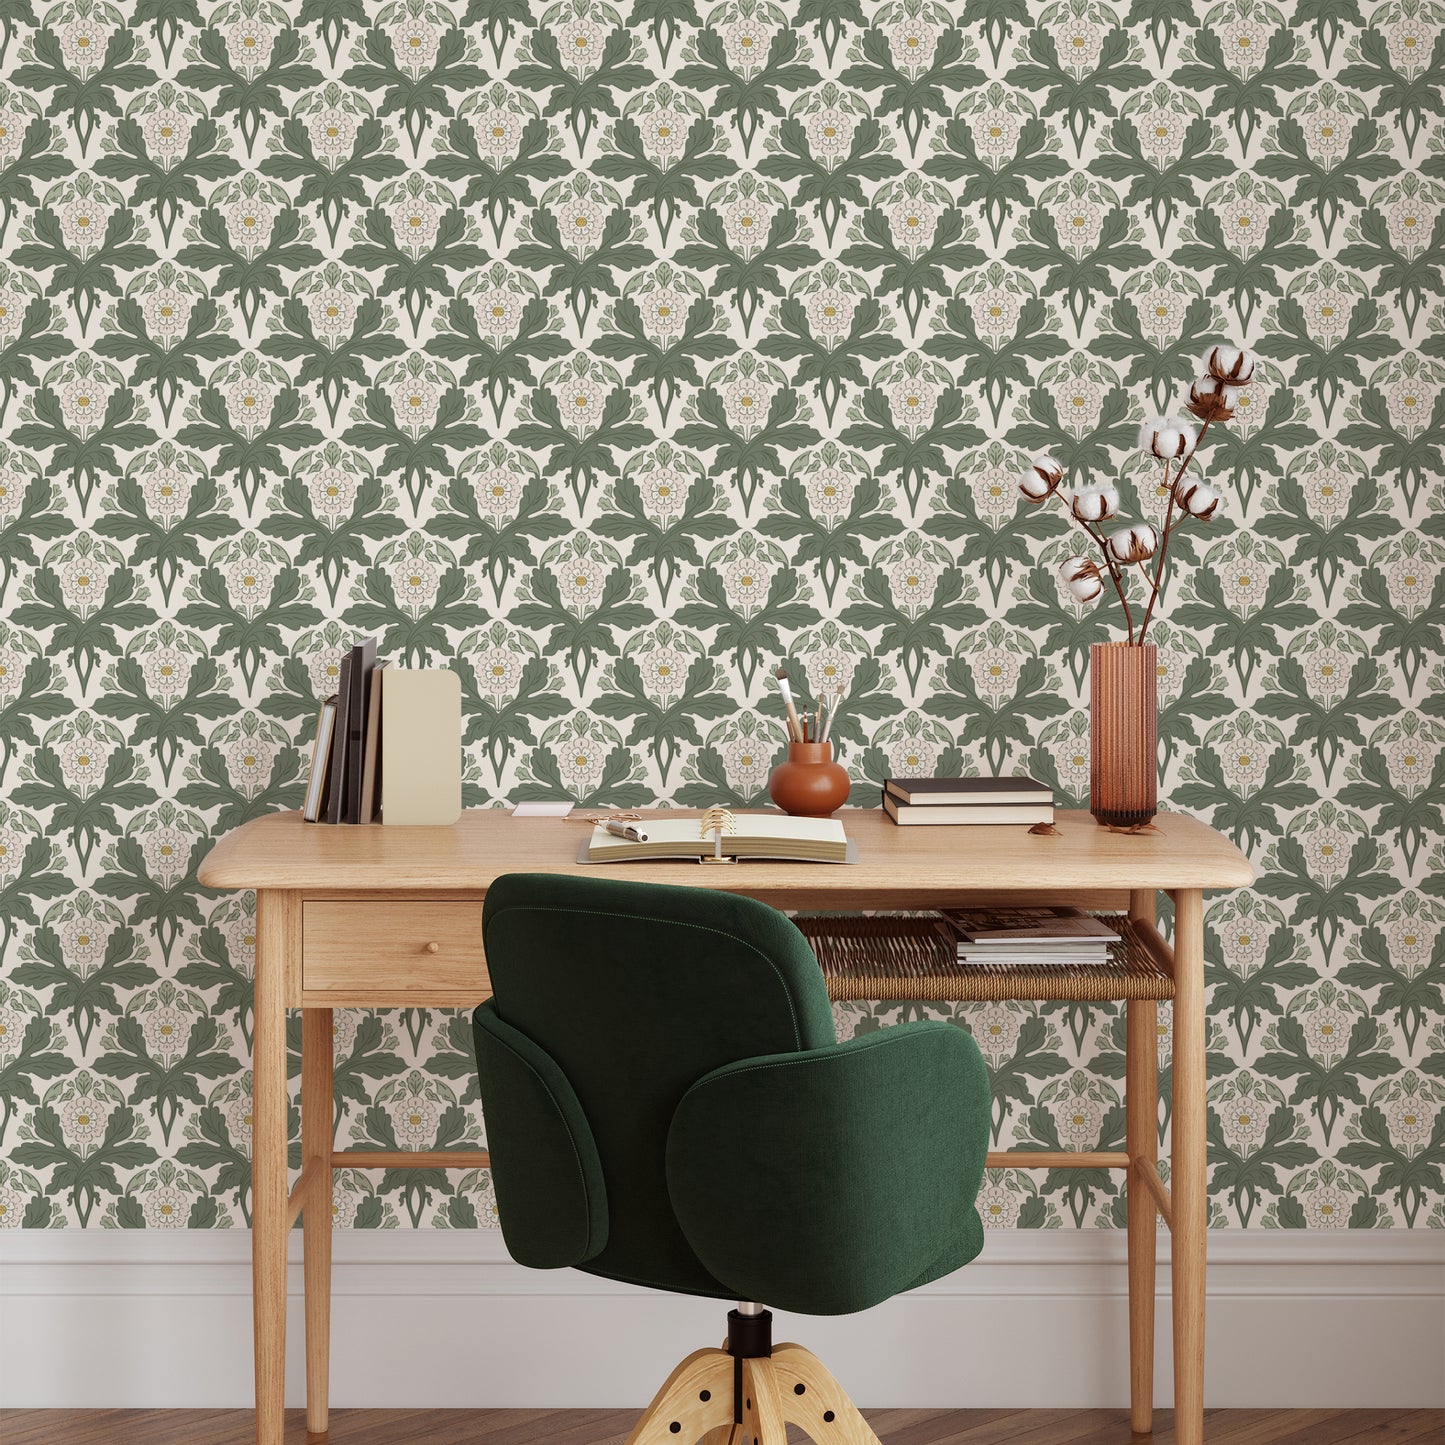 Introduce a touch of sophistication to your space with Verdant Victoriana - Fern wallpaper. This luxurious Victorian-style design features intricate florals and leaves, bringing an elegant and timeless charm to your walls.